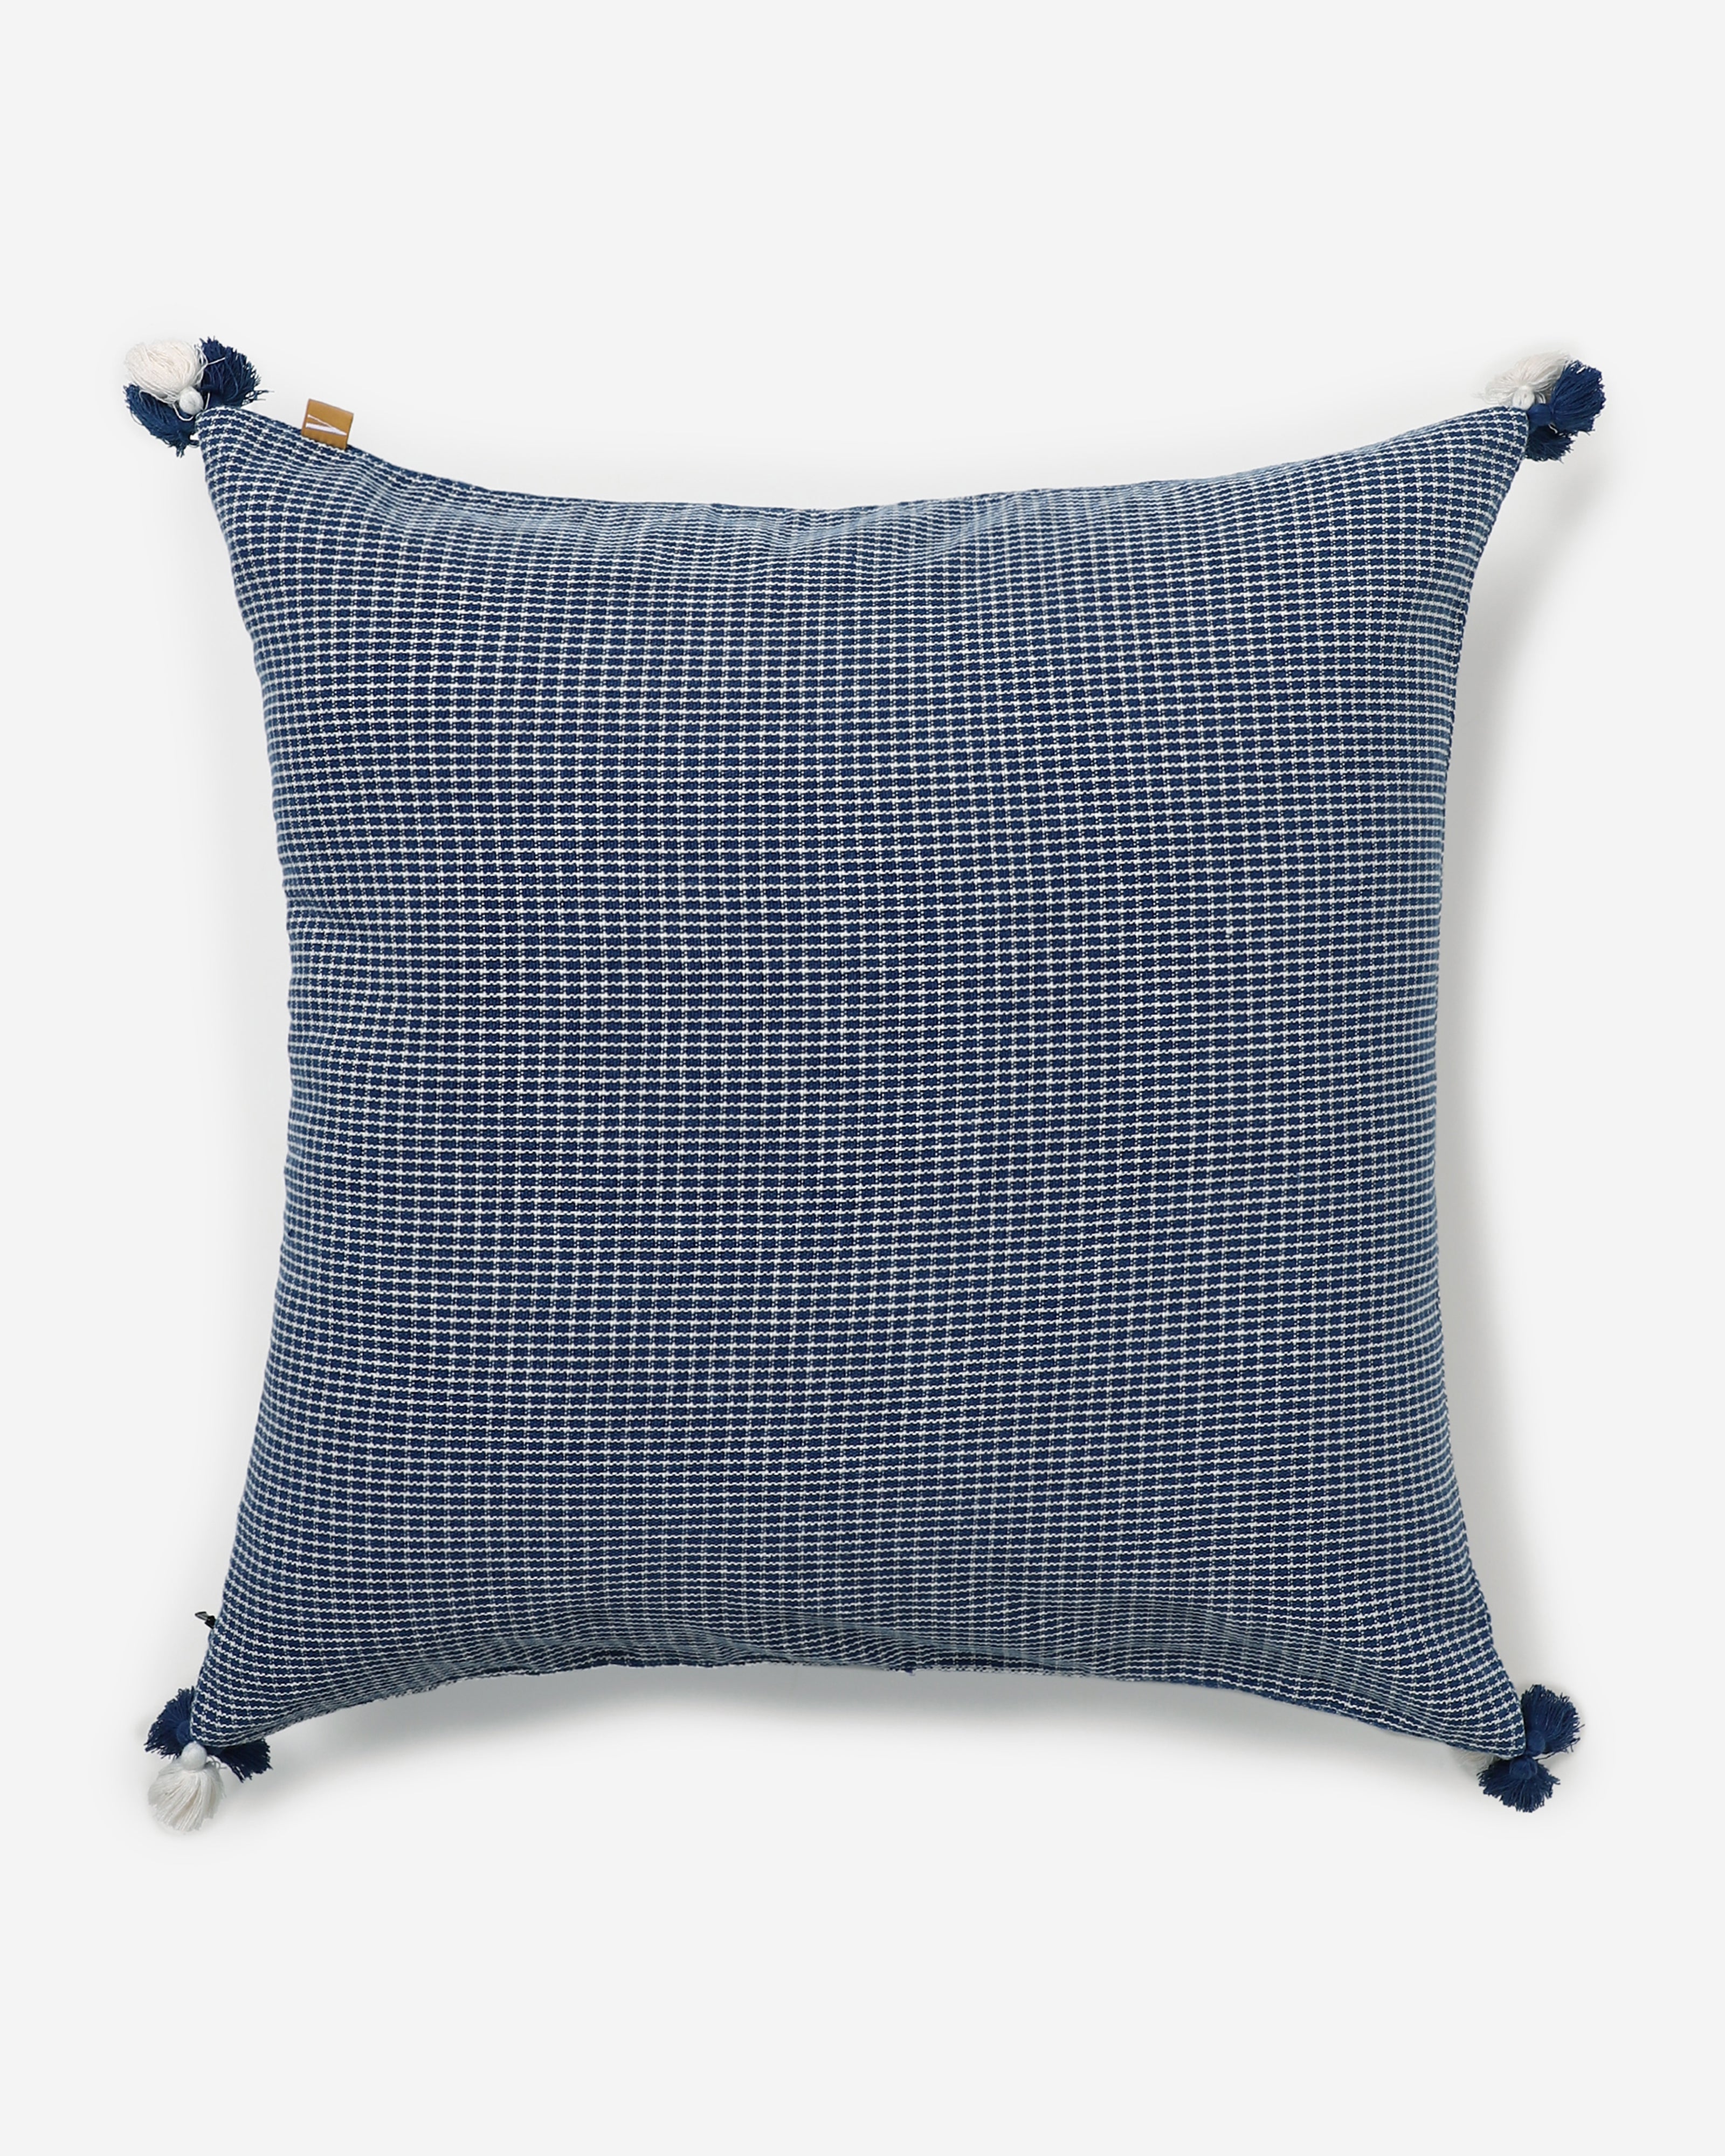 Jhilmil Extra Weft Cotton Cushion Cover